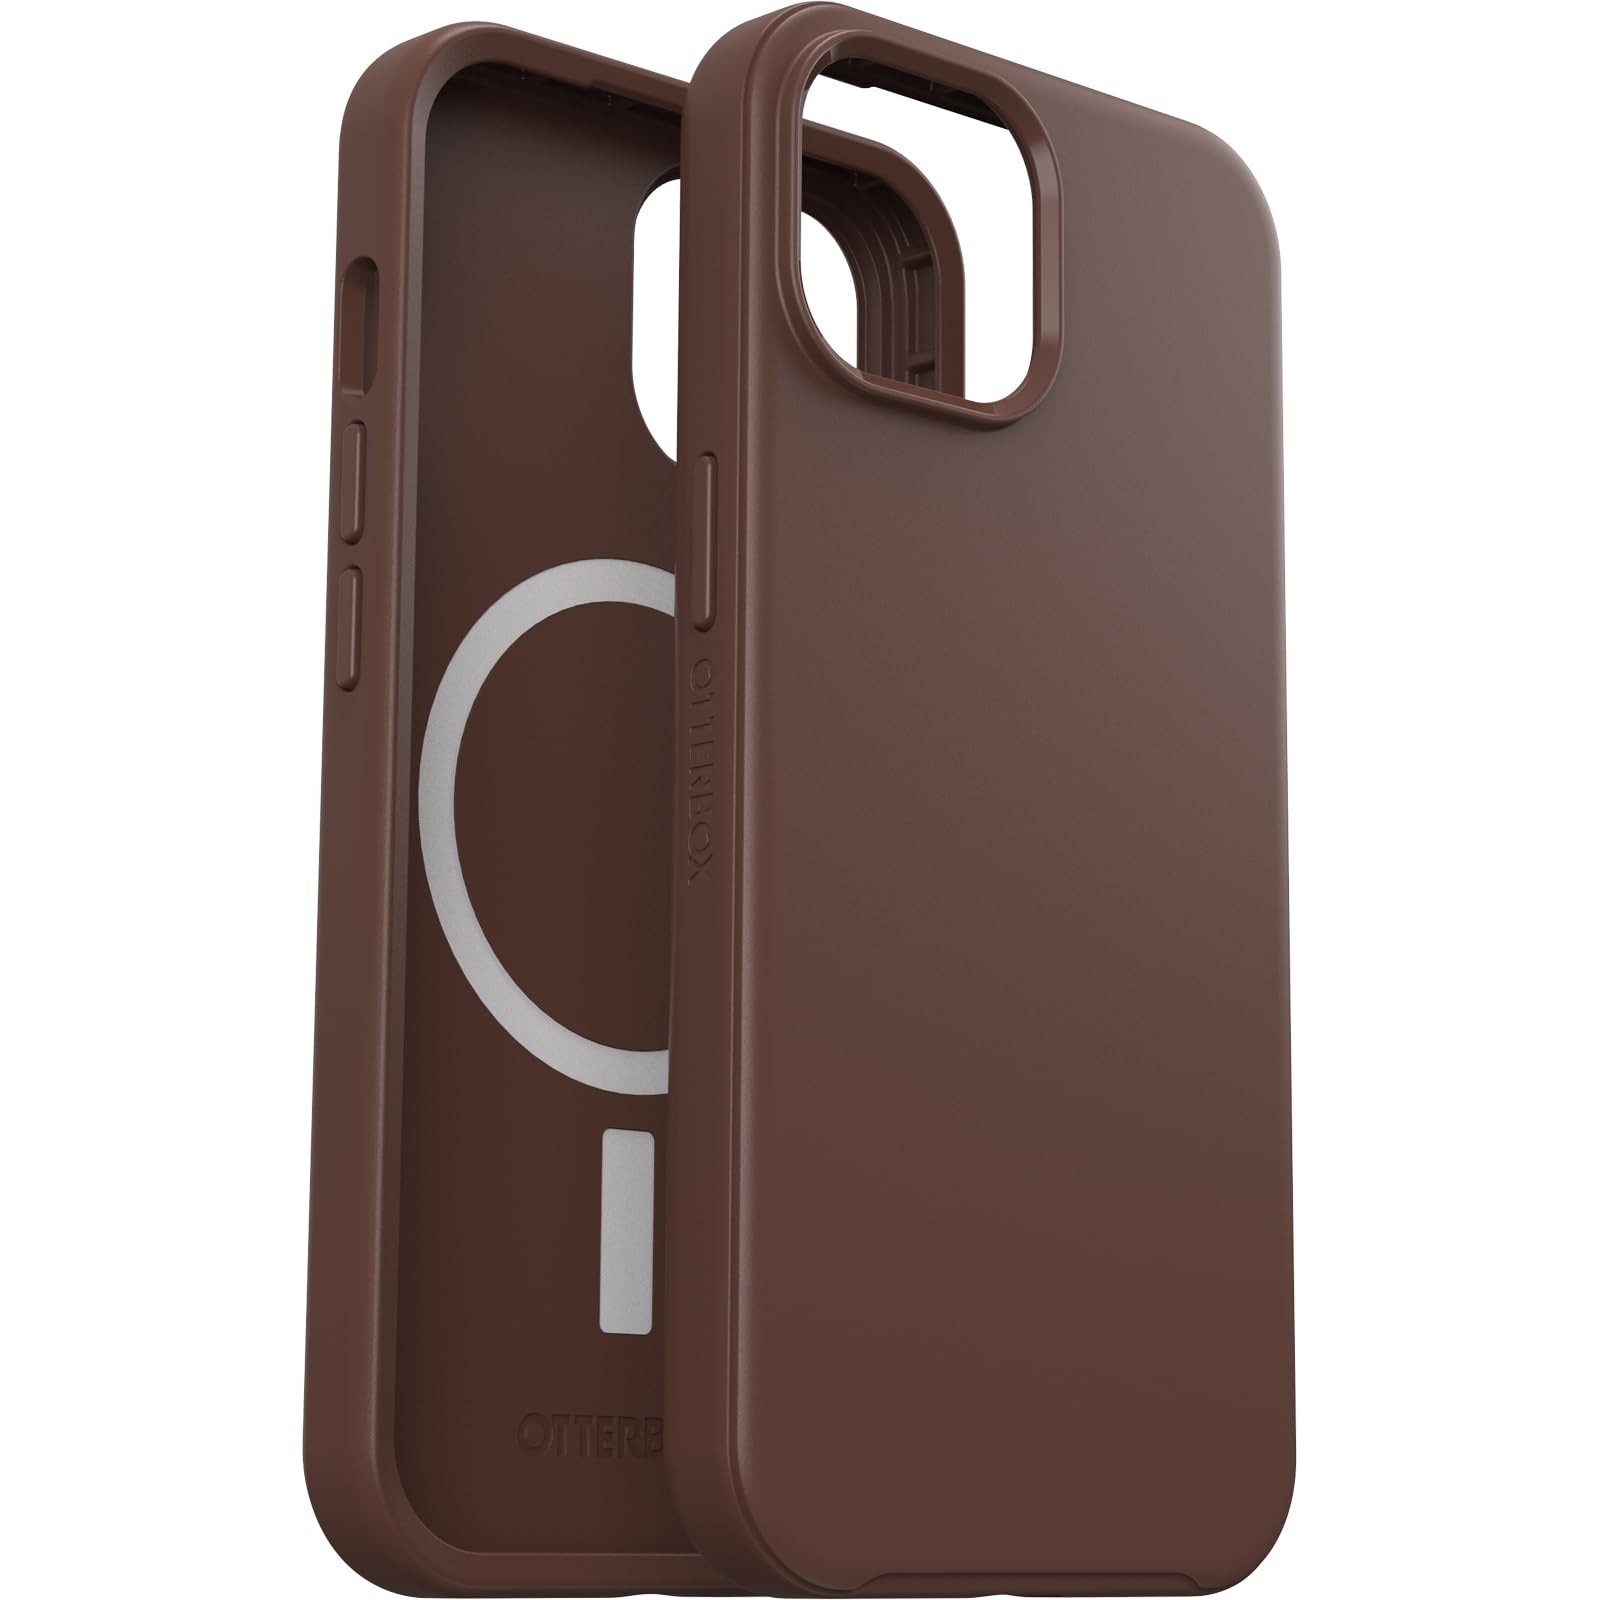 OtterBox iPhone 15, iPhone 14, and iPhone 13 Symmetry Series Case - CHOCOLATE BAR (Brown), snaps to MagSafe, ultra-sleek, raised edges protect camera & screen